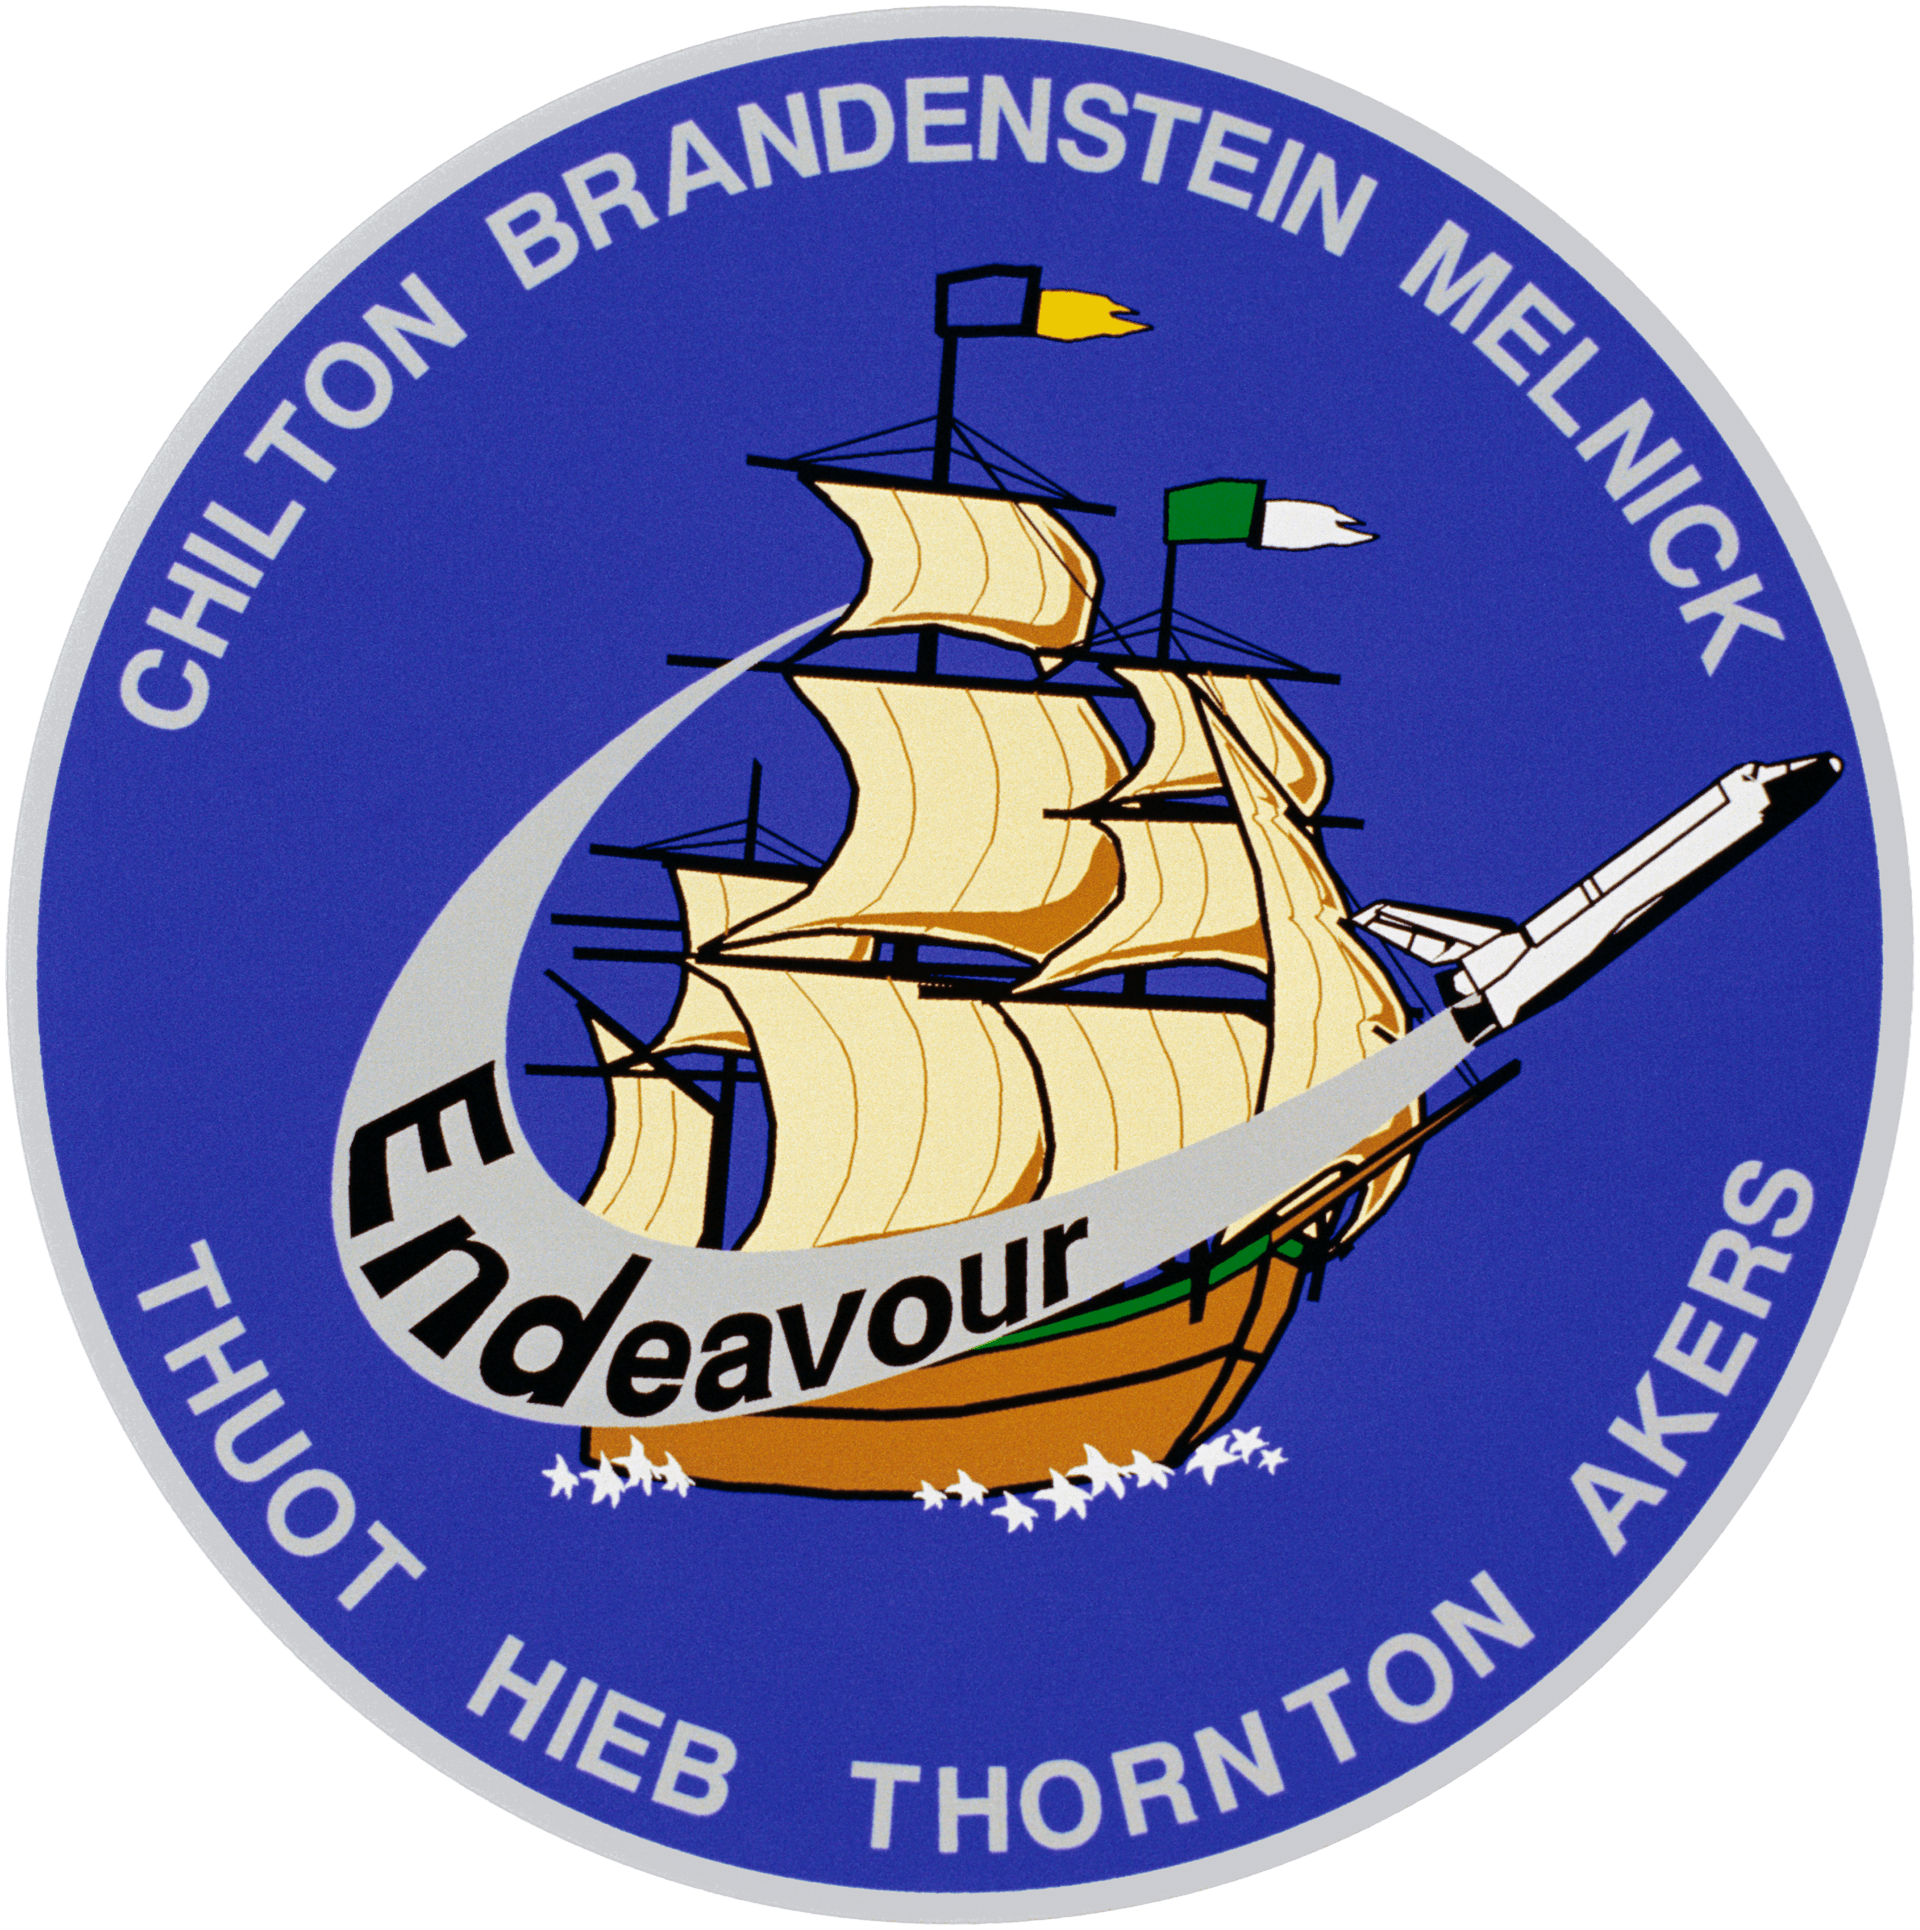 Mission patch for STS-49